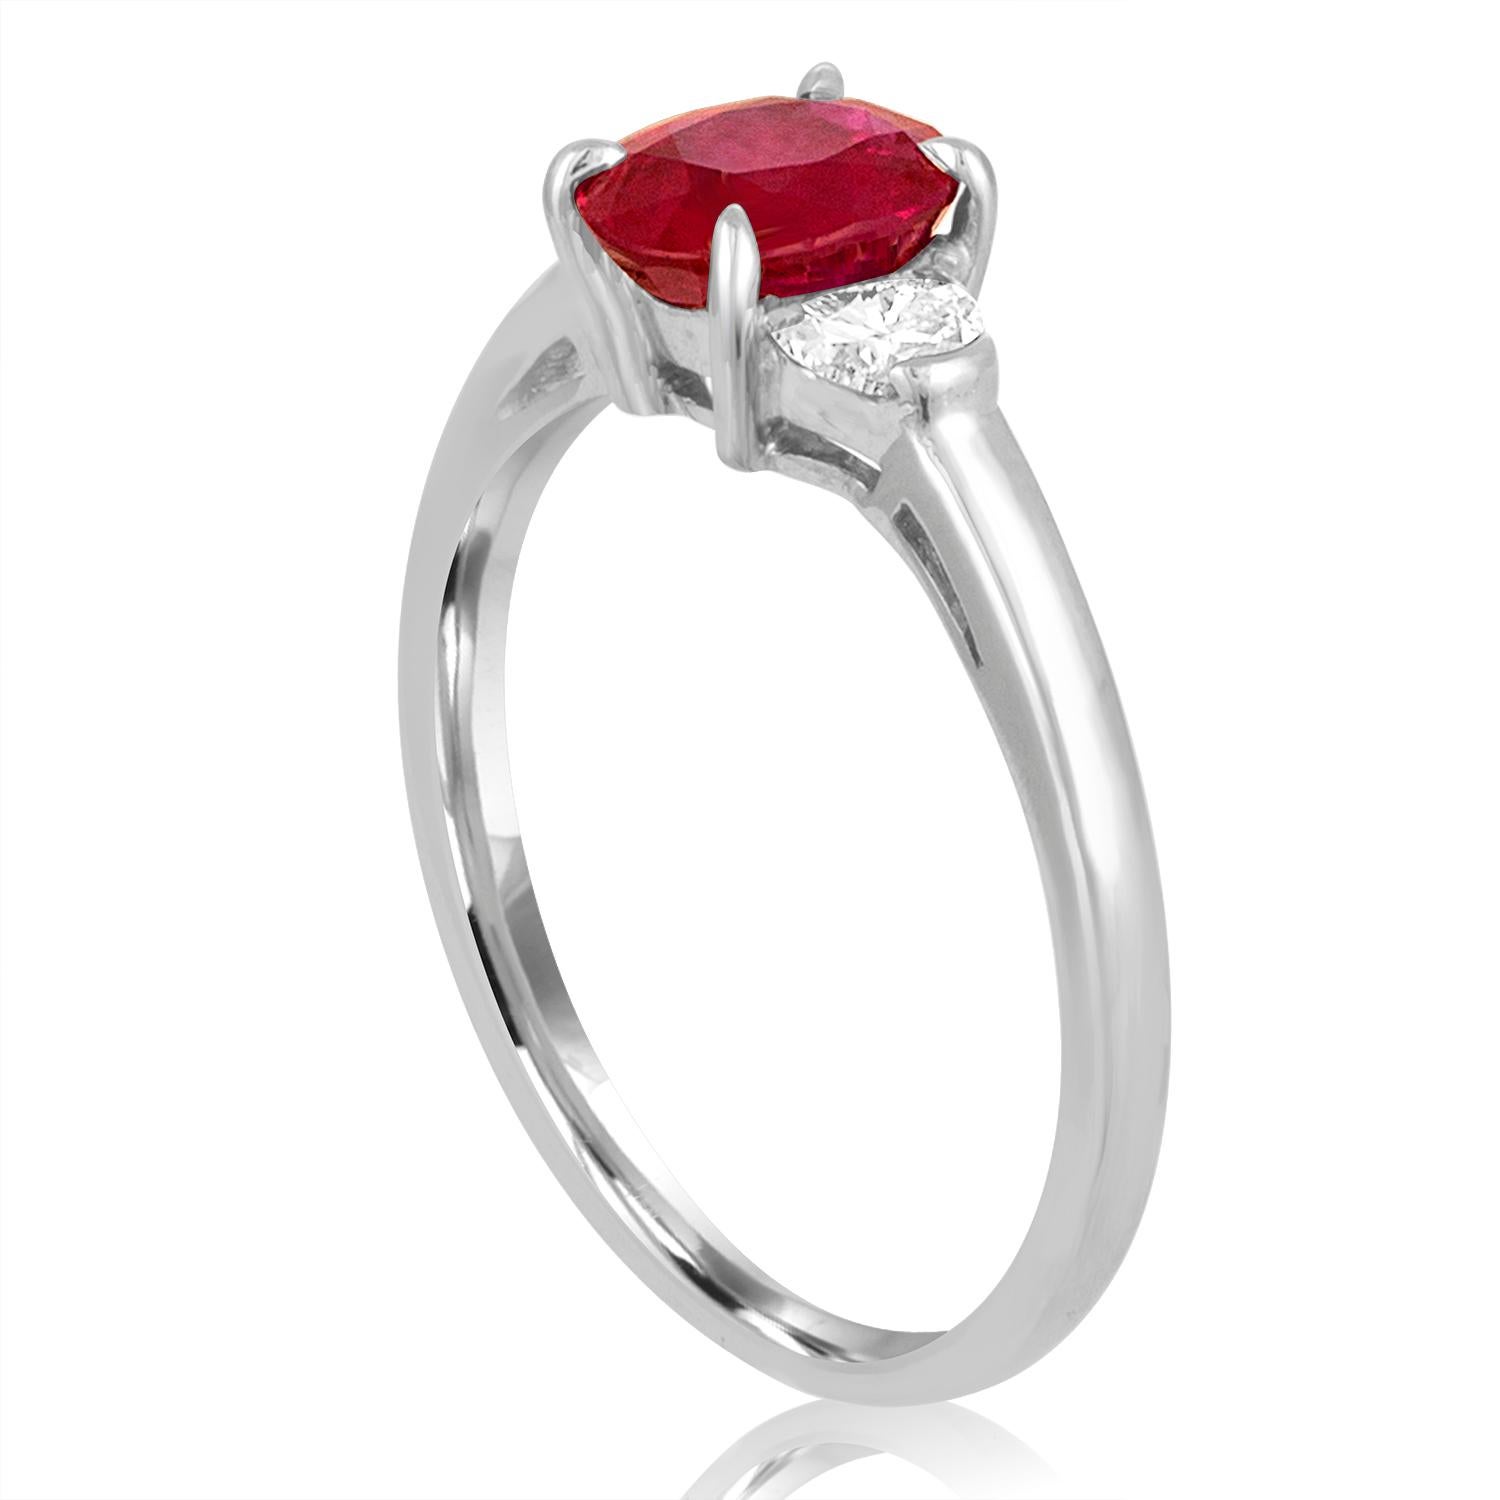 The ring is 18K White Gold
The Diamonds are Half Moons Total 0.30 Carats G VS
The center stone is an Oval Ruby, AGL Certified
The ruby is 1.04 Carats Heated
The ring is a size 6.25, sizable.
The ring weighs 2.6 grams